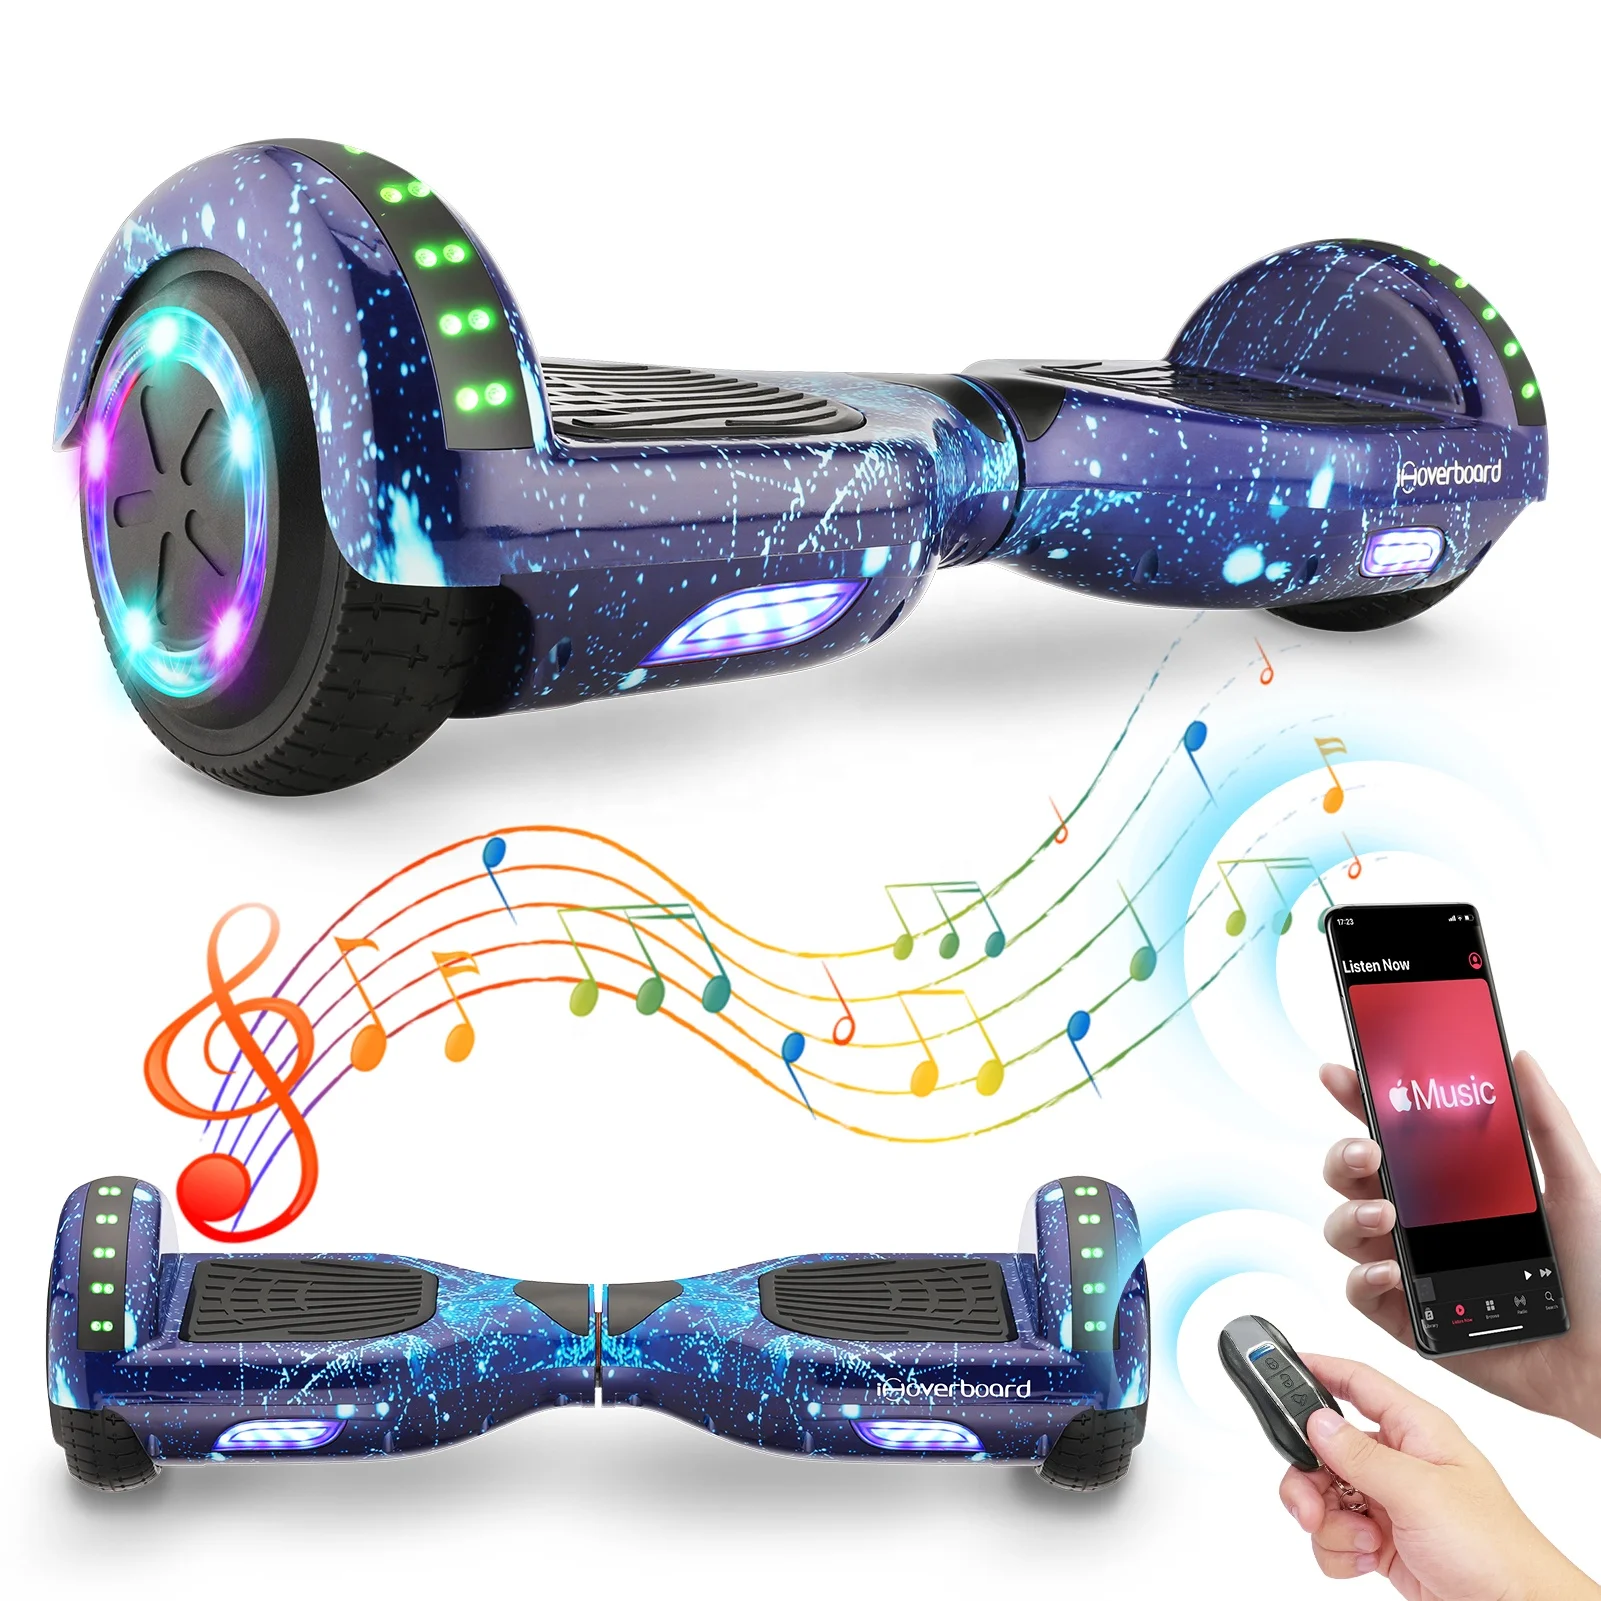 

6.5 inch 2 Wheel Smart Balance Scooter Hover board Standing light weight kids Hoverboard electric scooter